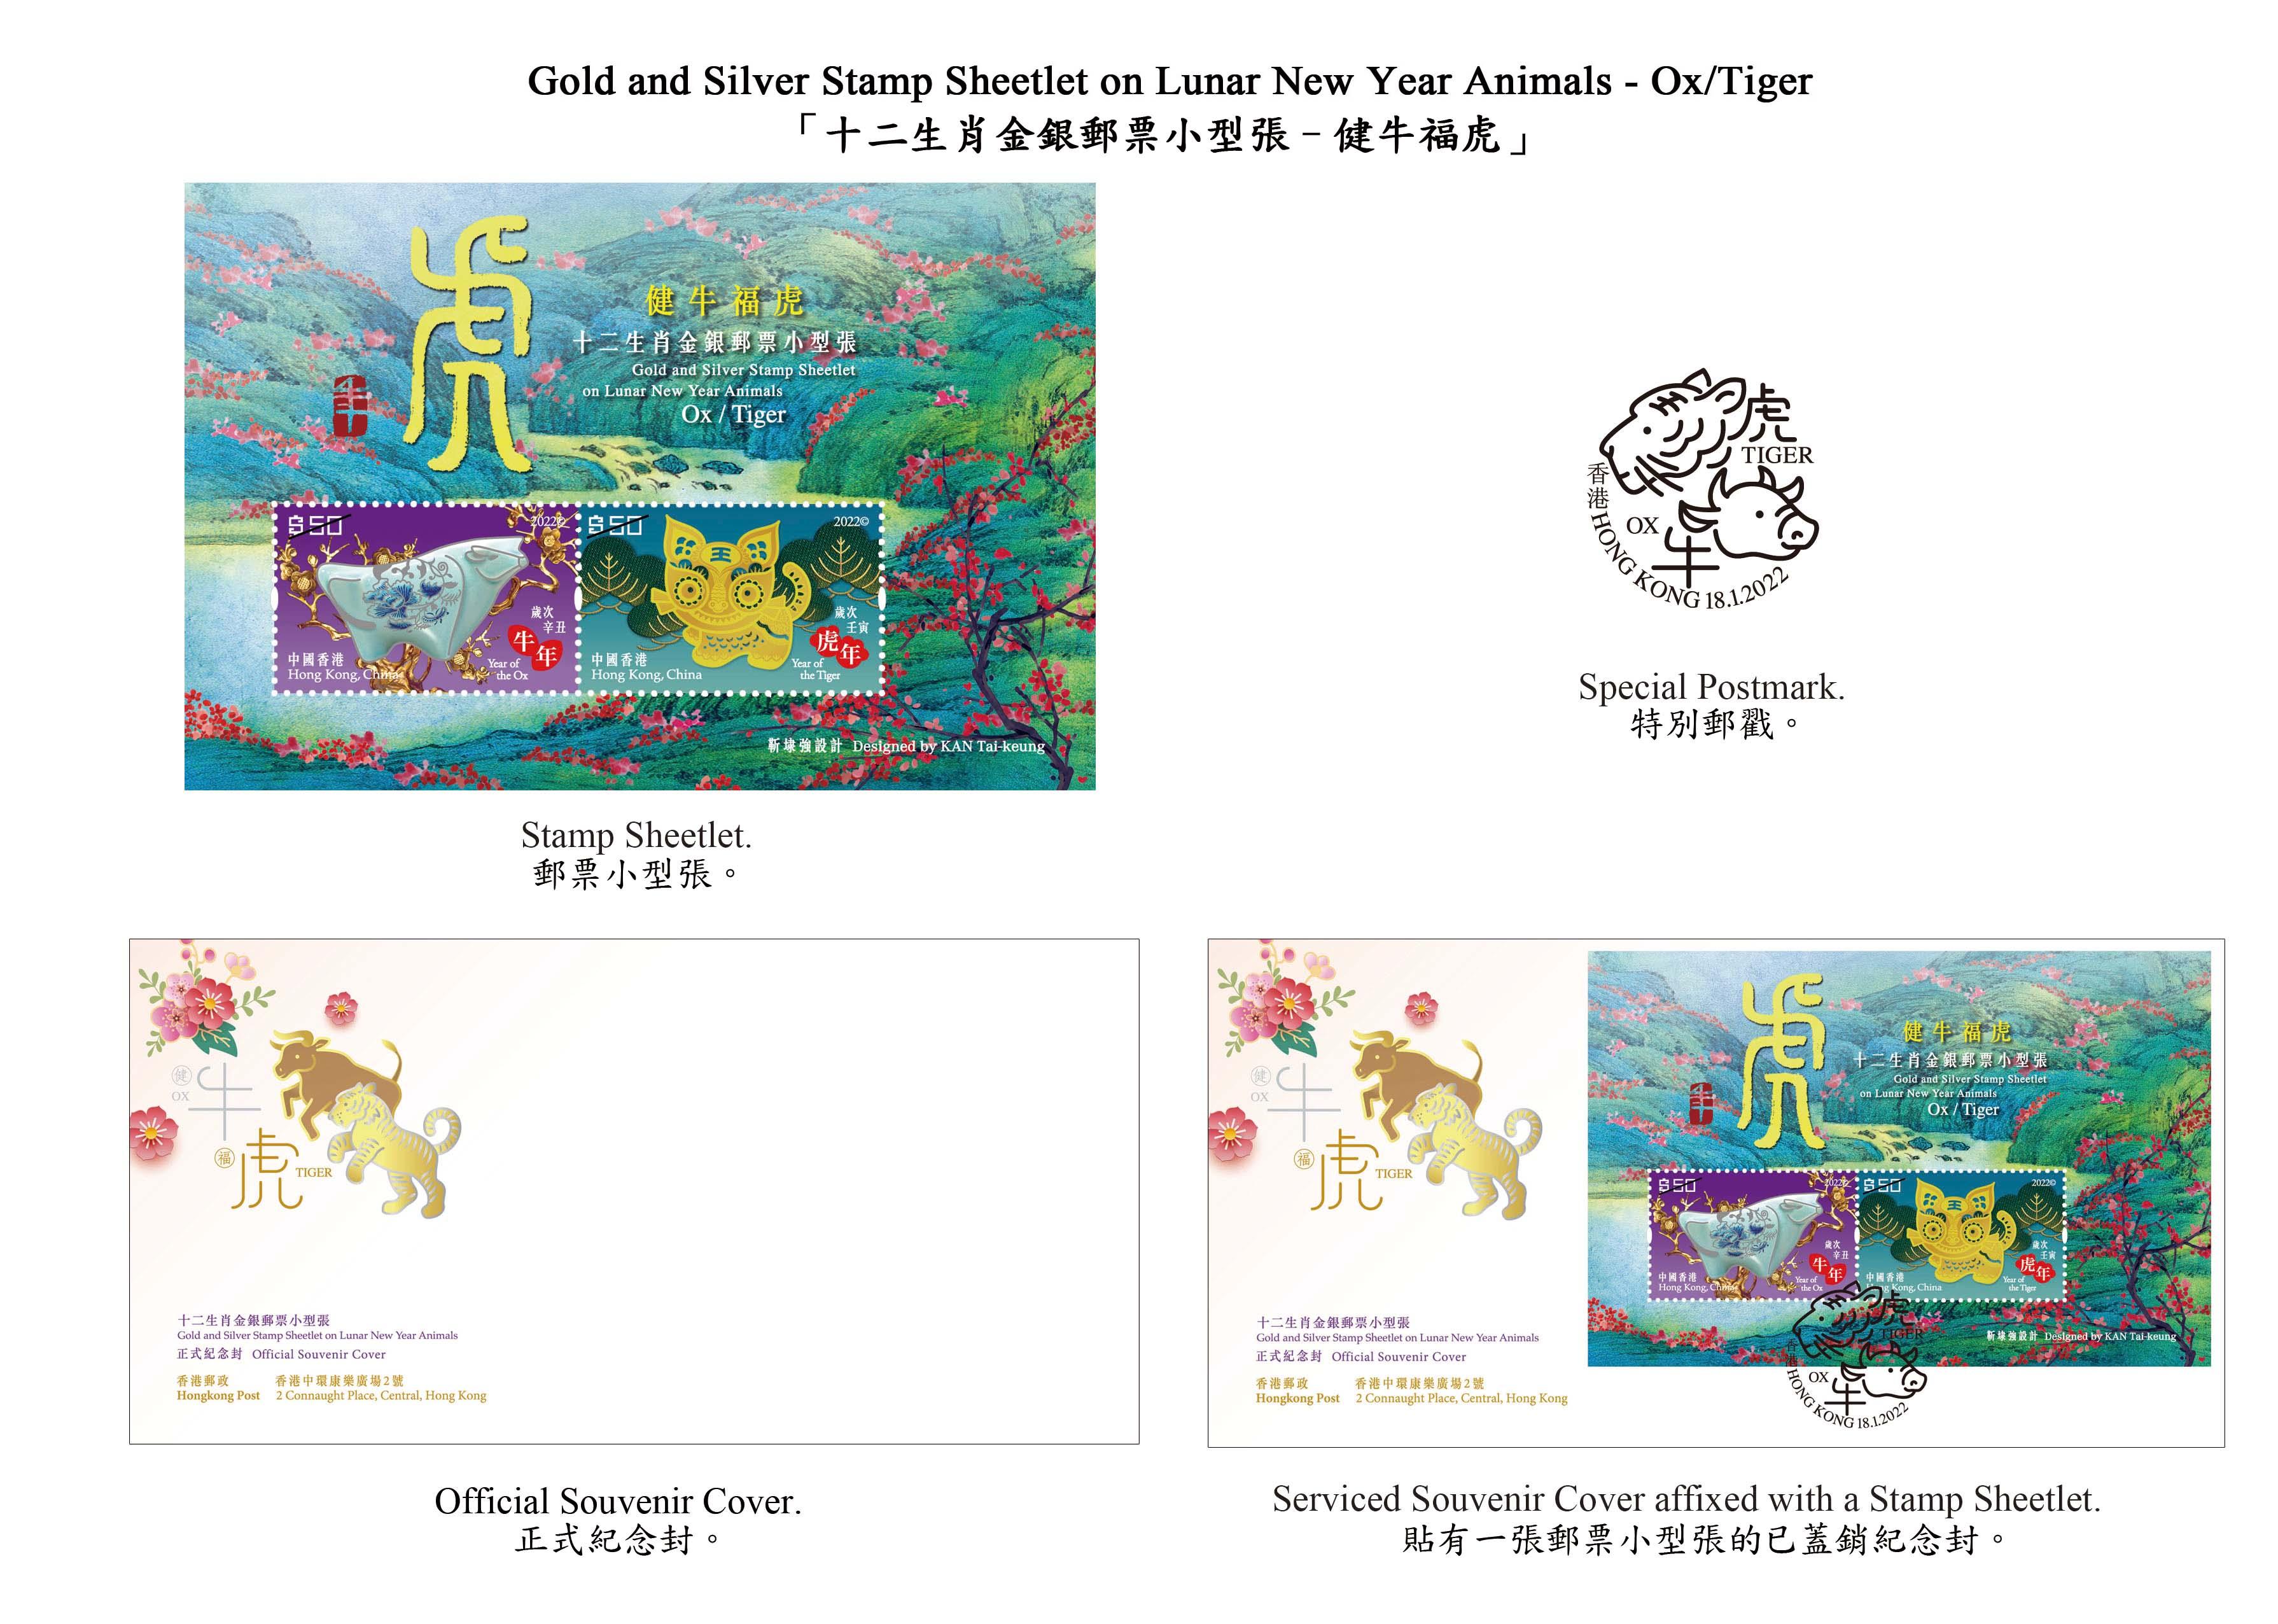 Hongkong Post will launch a special stamp issue and associated philatelic products with the theme "Year of the Tiger" on January 18 (Tuesday). The "Gold and Silver Stamp Sheetlet on Lunar New Year Animals - Ox/Tiger" will also be launched on the same day. Photo shows the stamps sheetlet, souvenir covers and special postmark.
